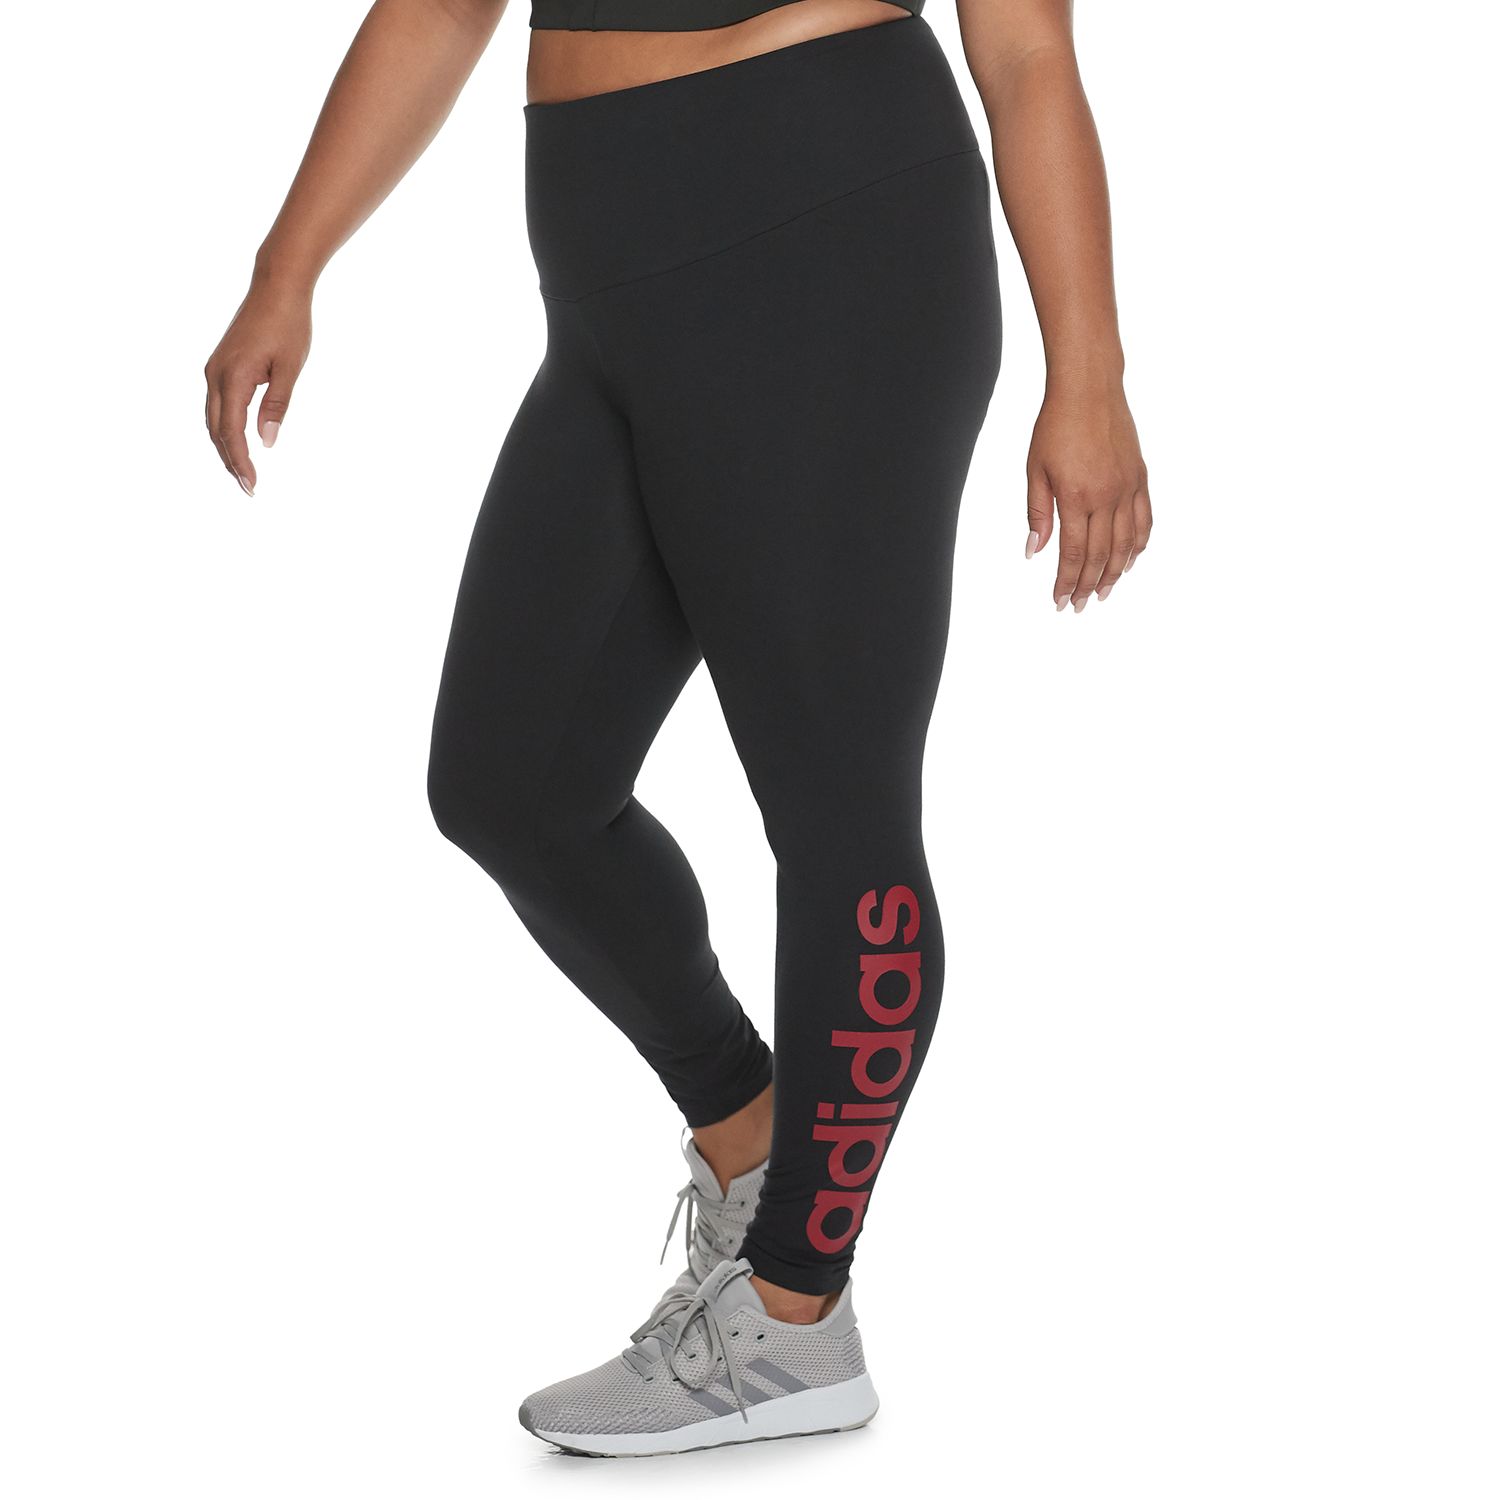 adidas leggings with logo down the side